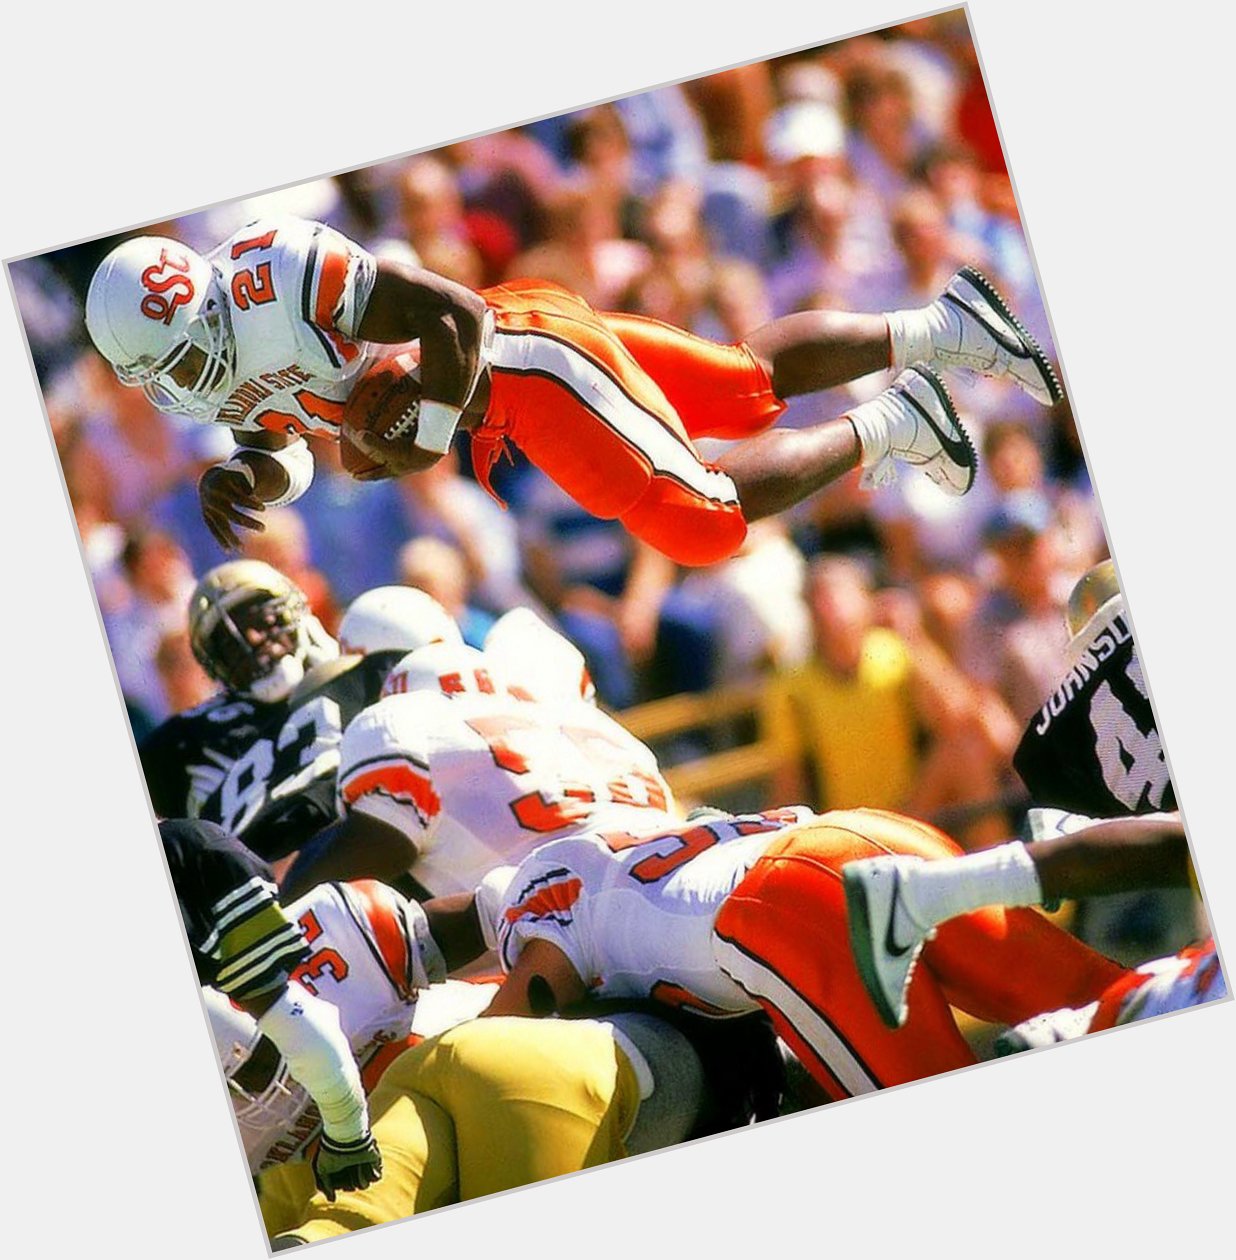 Barry Sanders leaps over the defense in the classic OSU jerseys Happy Birthday Barry! 